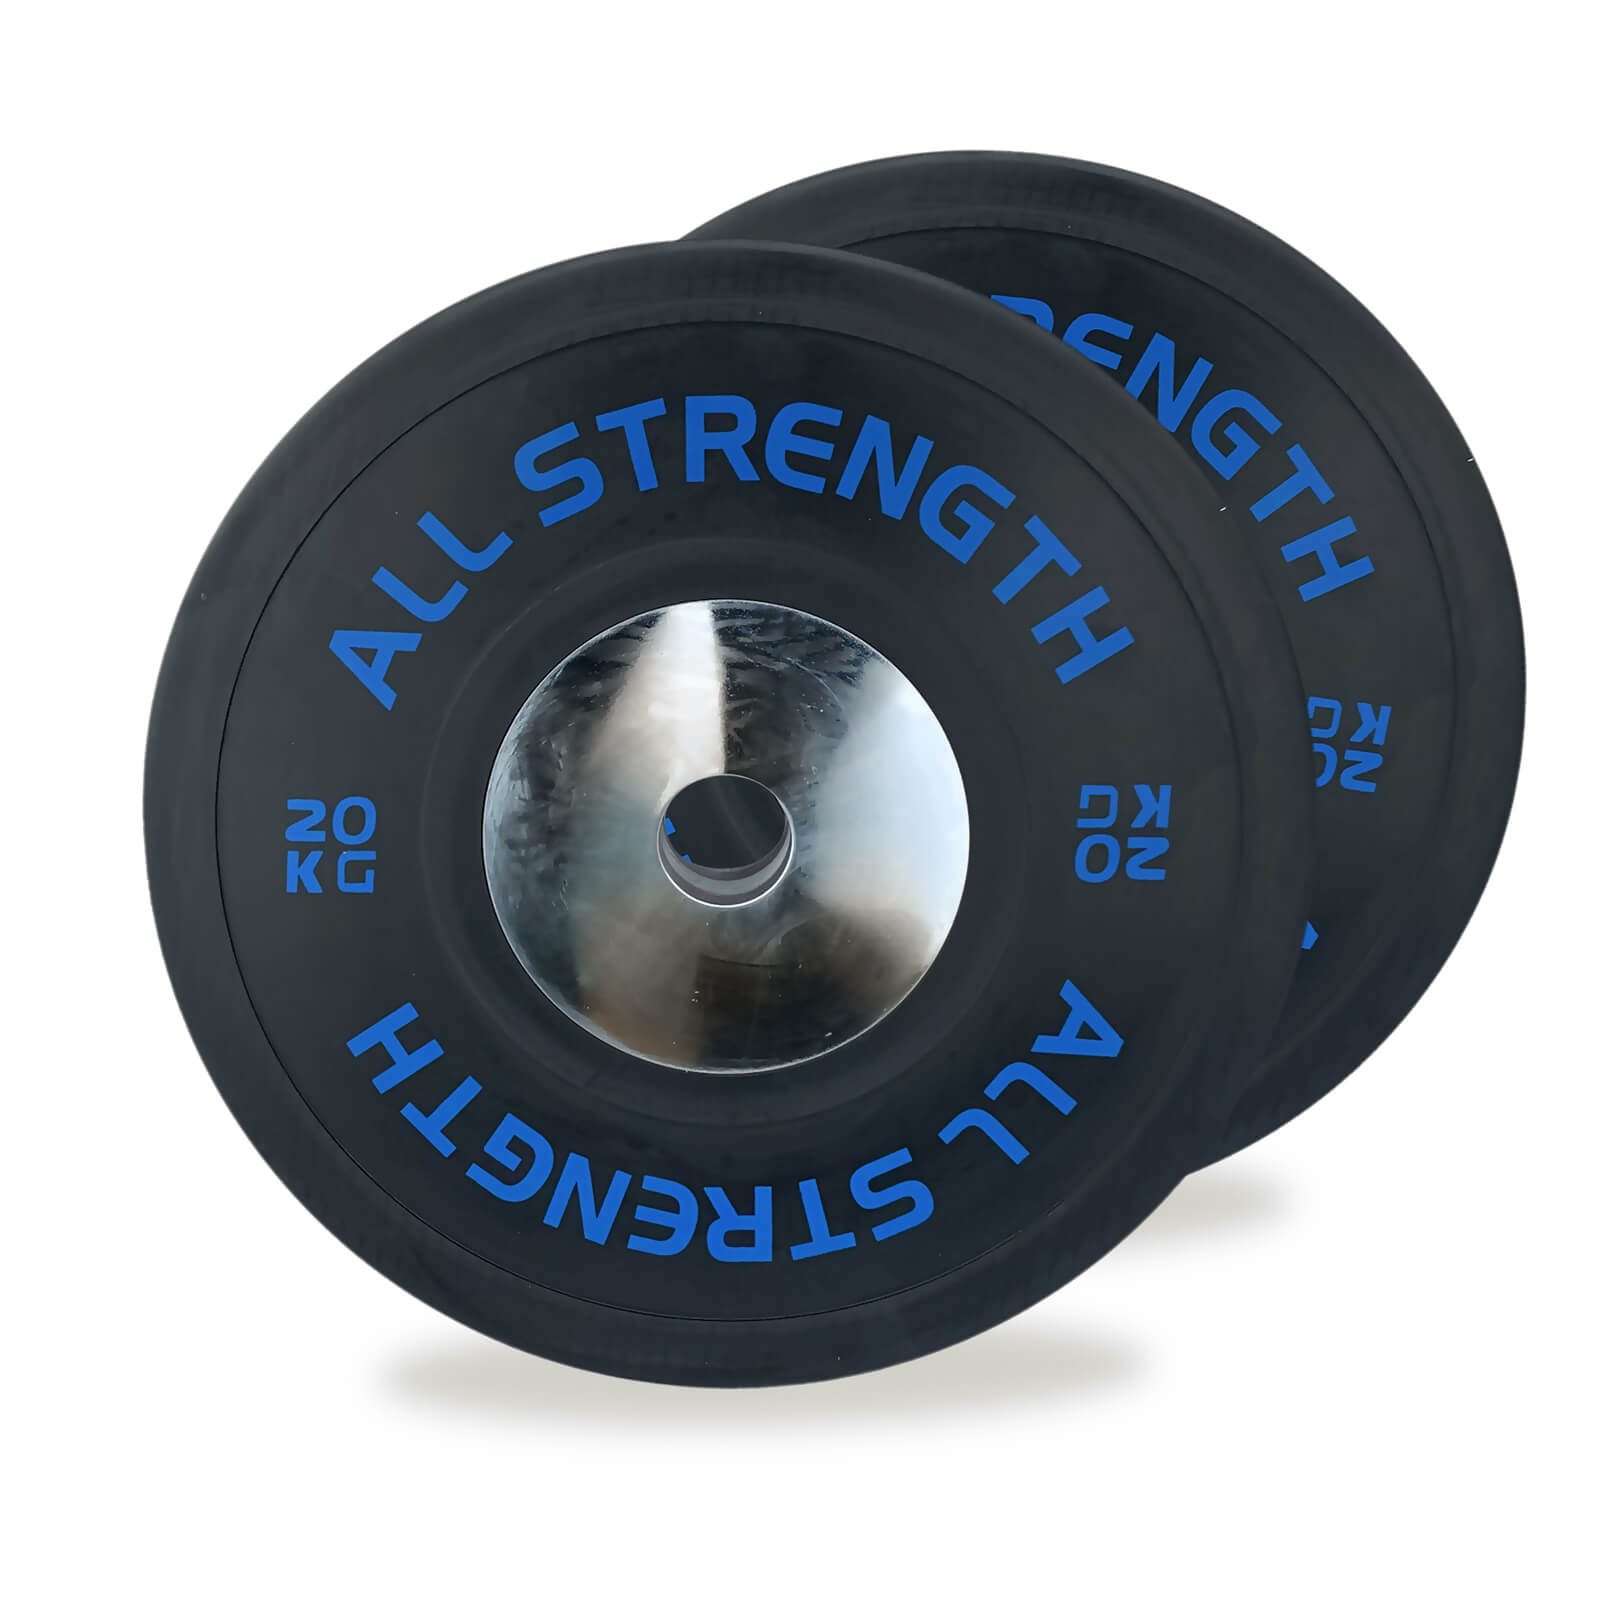 Competition Bumper Plates, 2 x 20 kg, AllStrength